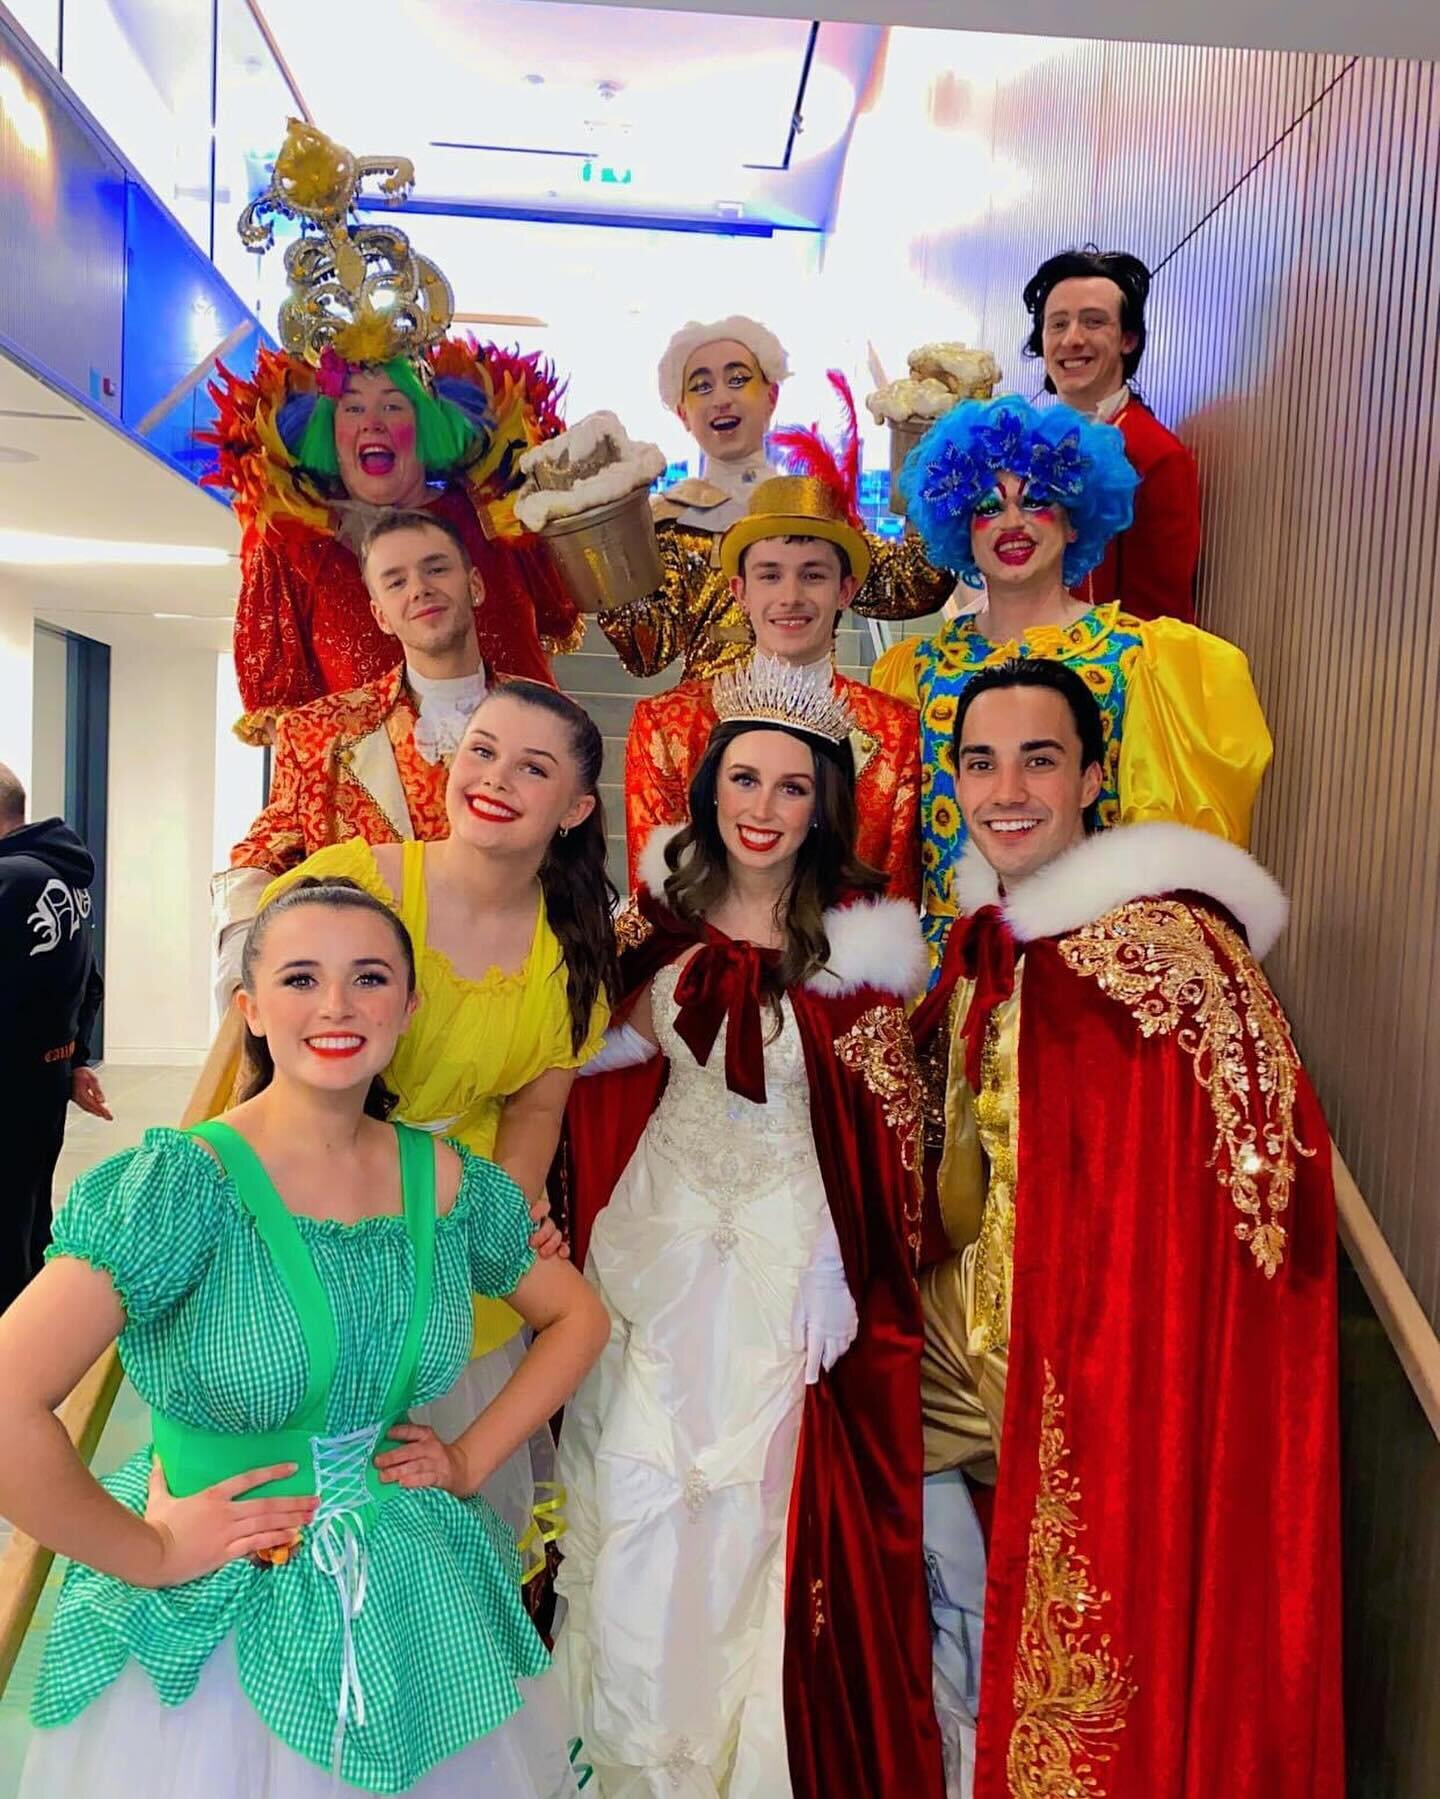 Don&rsquo;t miss out on DUBLIN&rsquo;S BEST PANTO. 
Get your tickets for Beauty and the Beast at the Lark Balbriggan! We&rsquo;re just down the road!